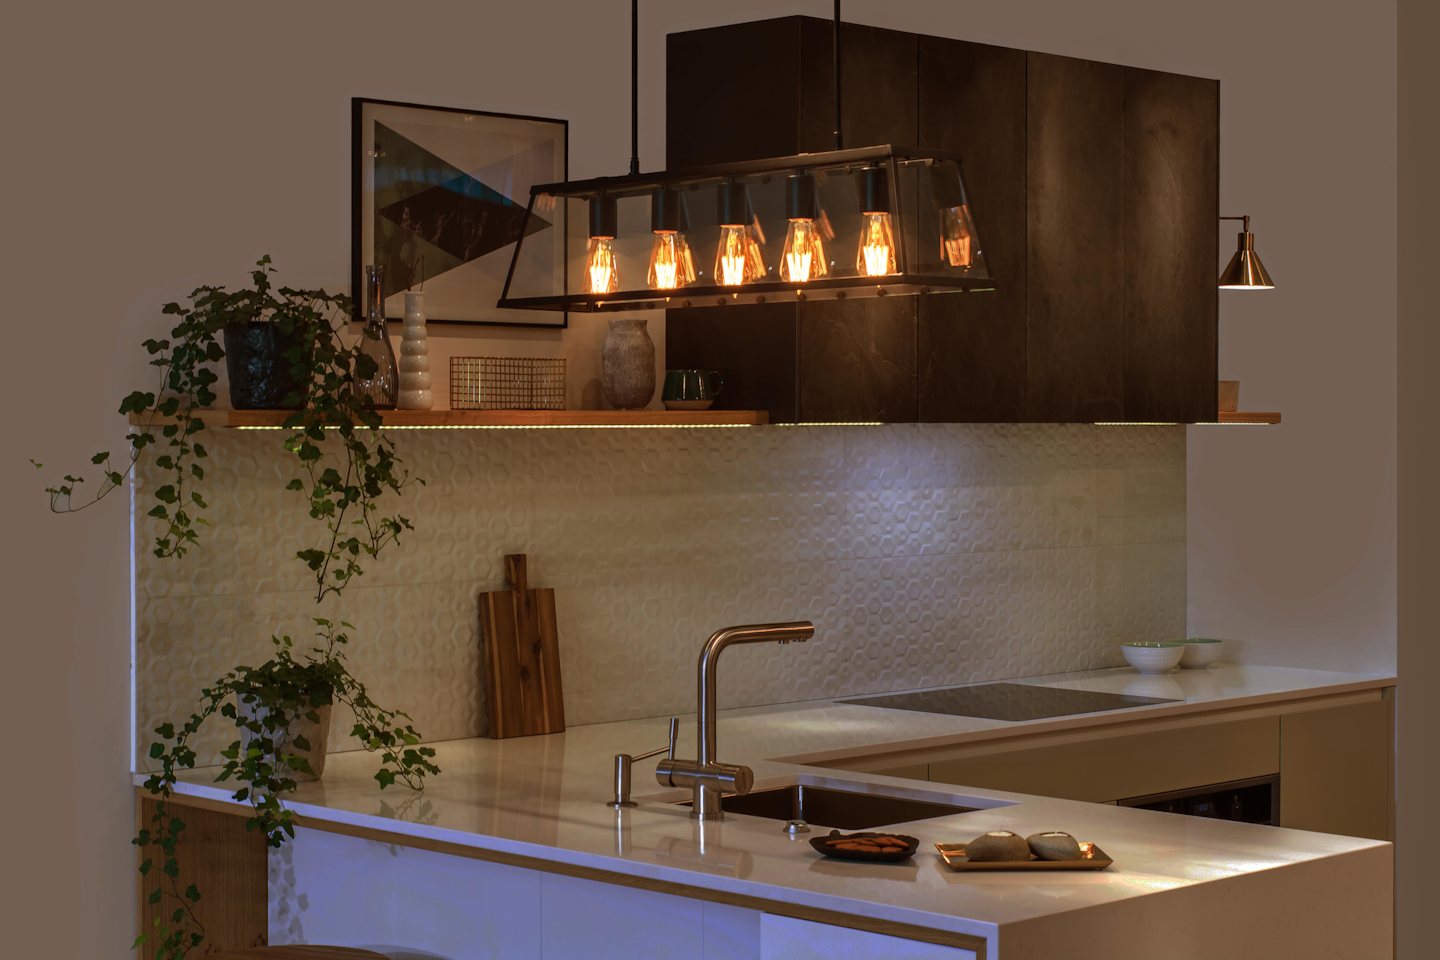 Buddy-owned LIFX presented vintage-style smart LED-filament lamps at CES this past week that are suited to both residential and hospitality applications. (Photo credit: Image courtesy of LIFX.)